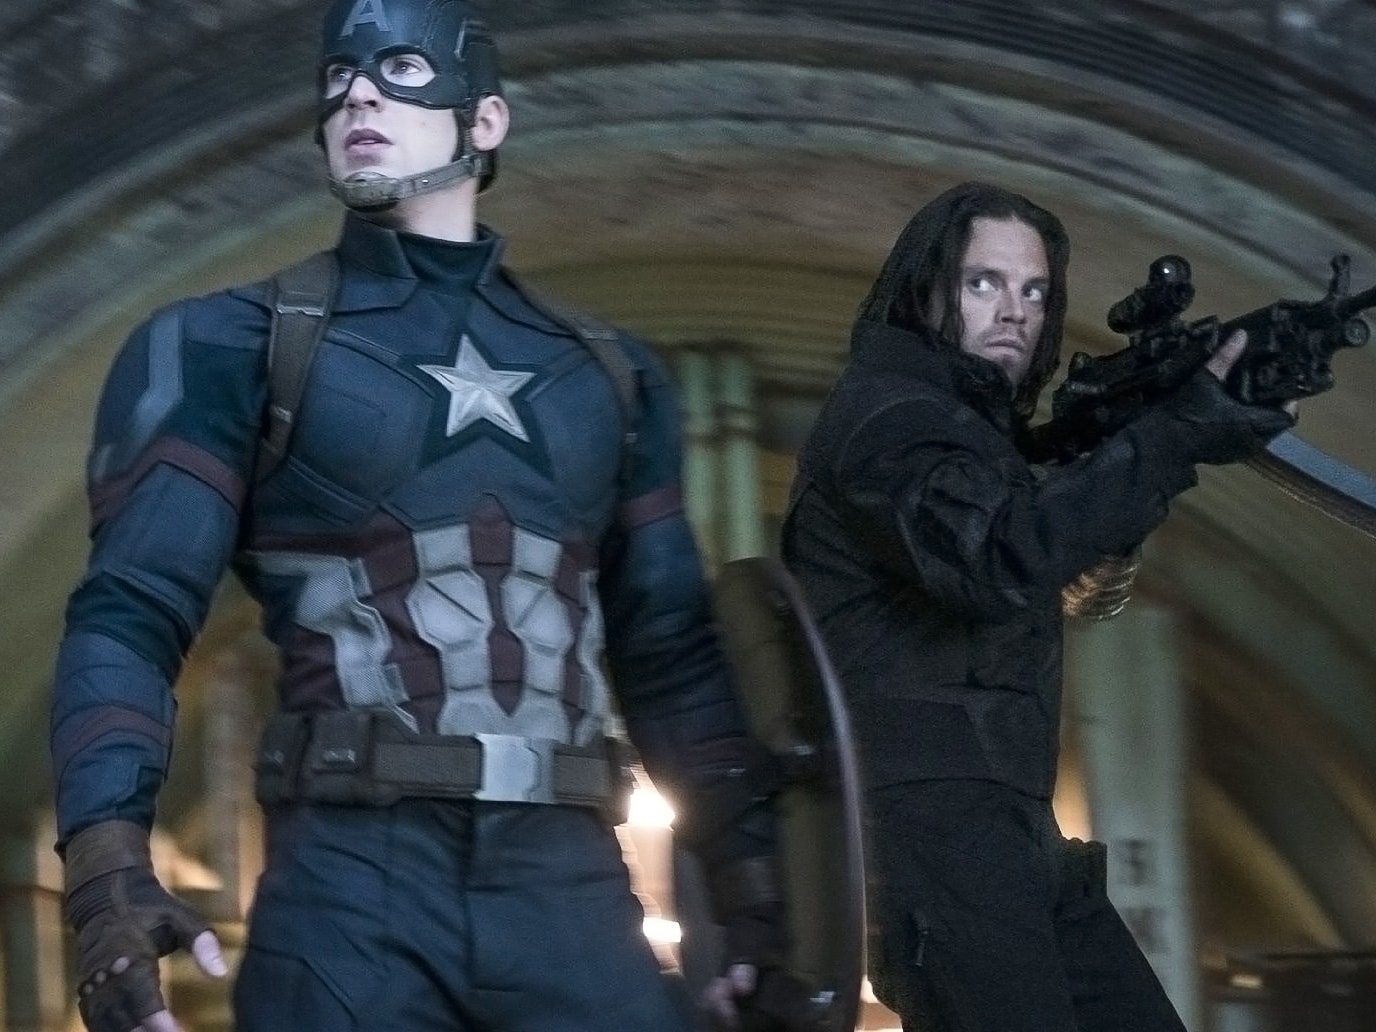 Captain America: Civil War' Focuses on the Best Love Story in the Marvel Universe